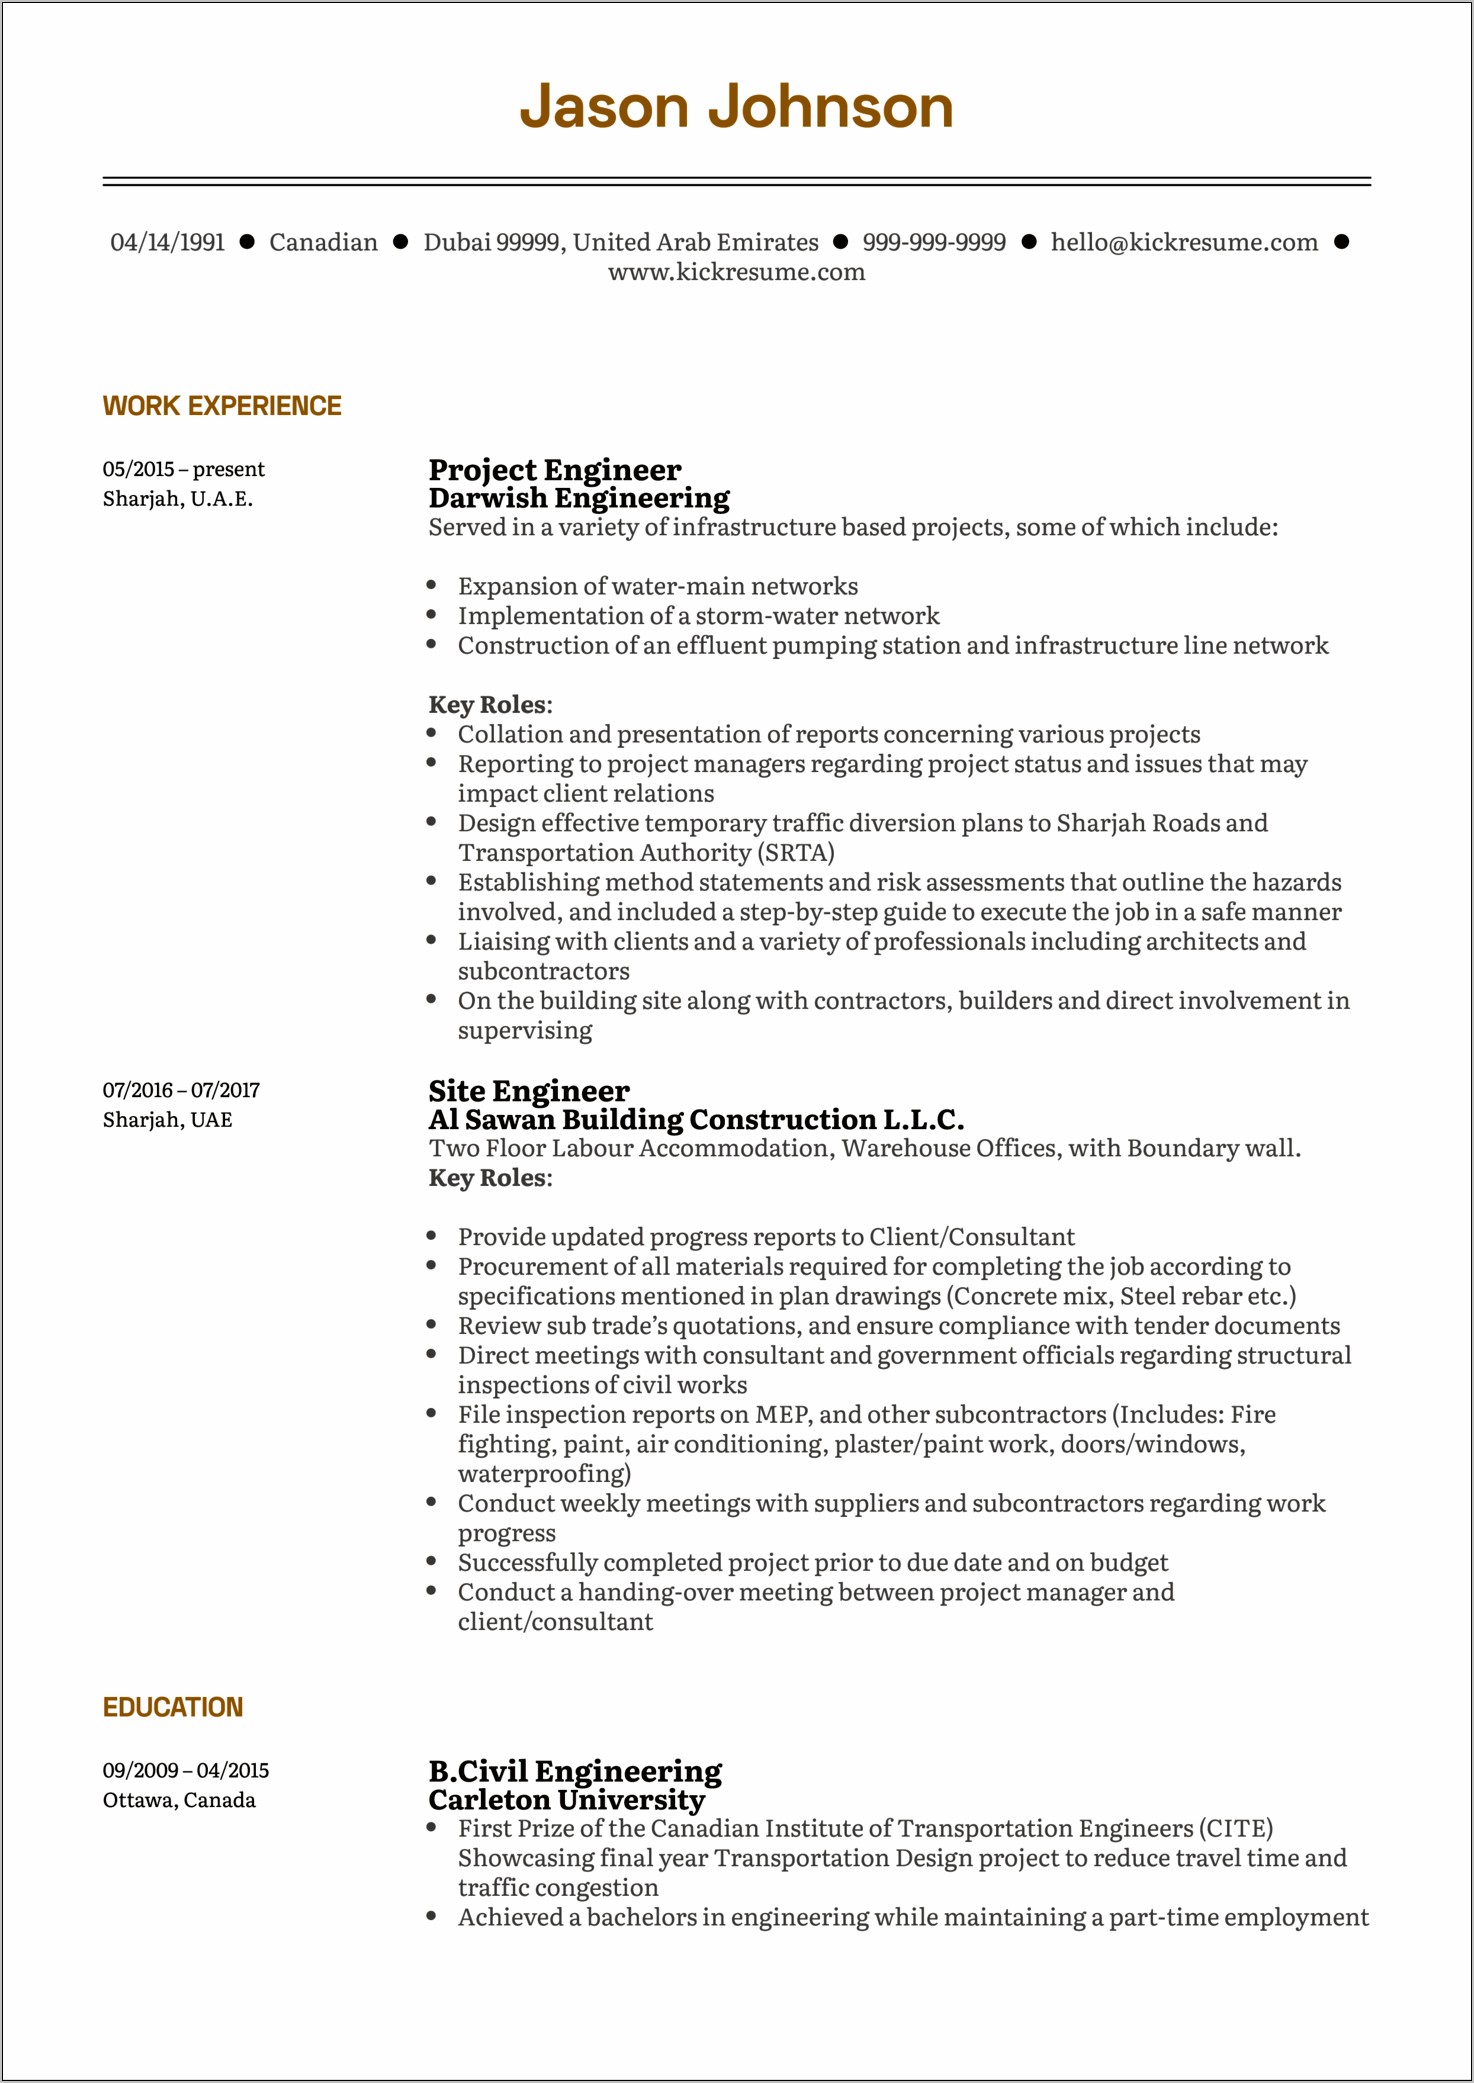 Resume Templates With Transportation Design Projects